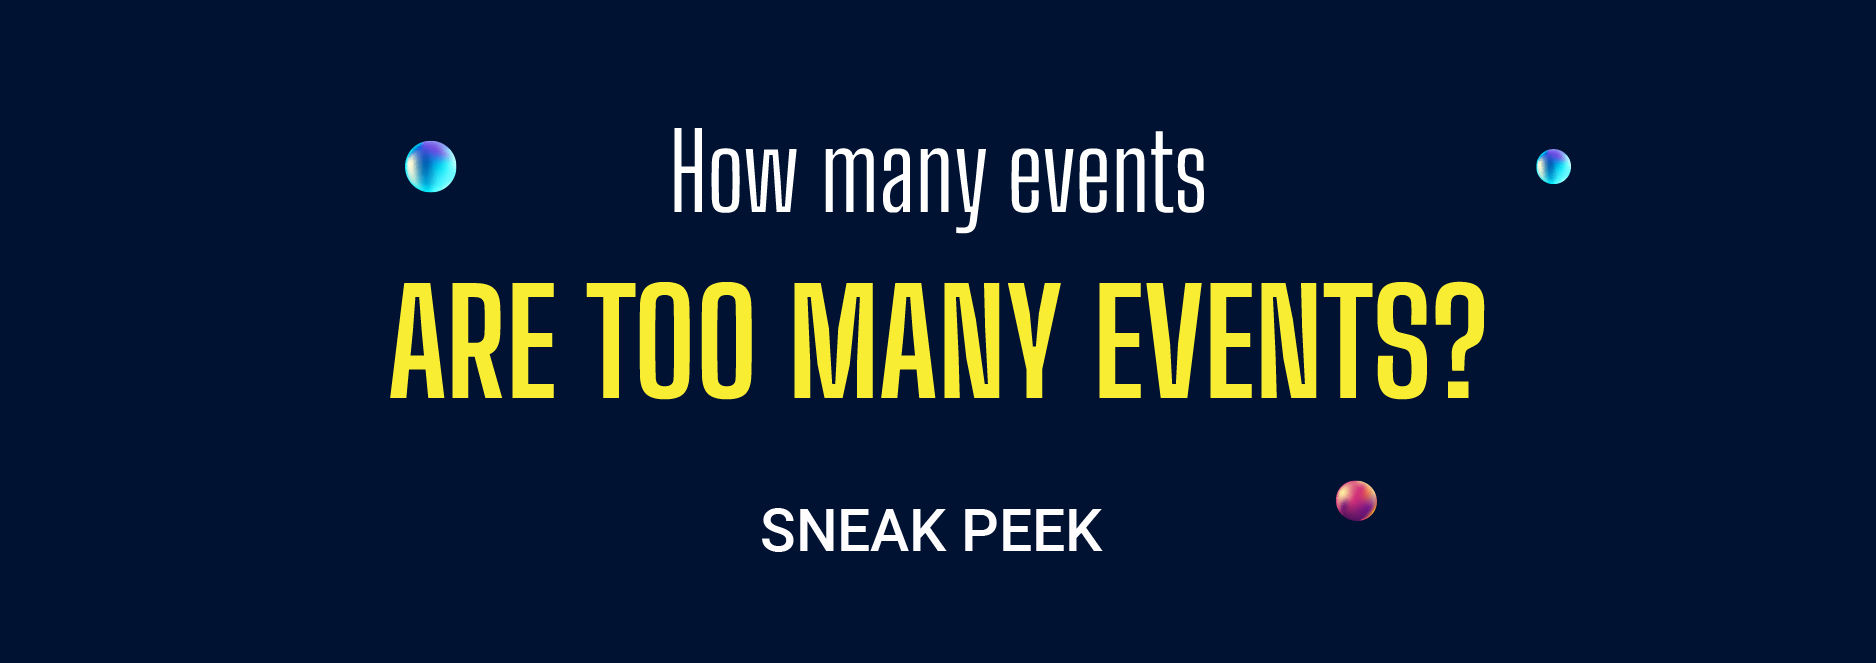 How many events are too many events?